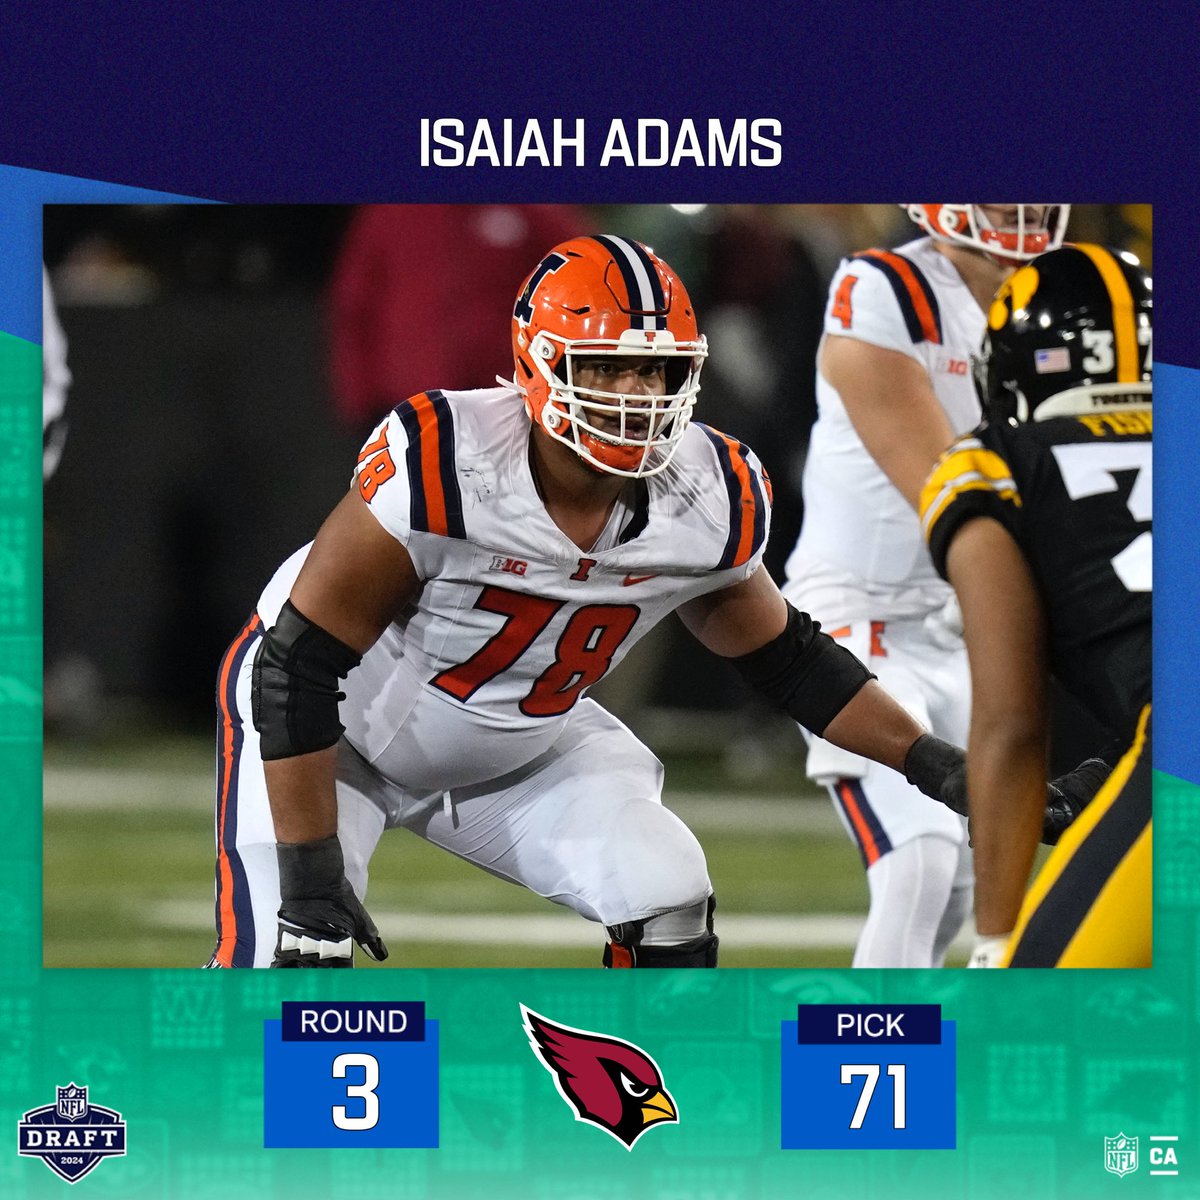 THE FIRST 🇨🇦 OFF THE BOARD!! Congrats, Isaiah! @AZCardinals